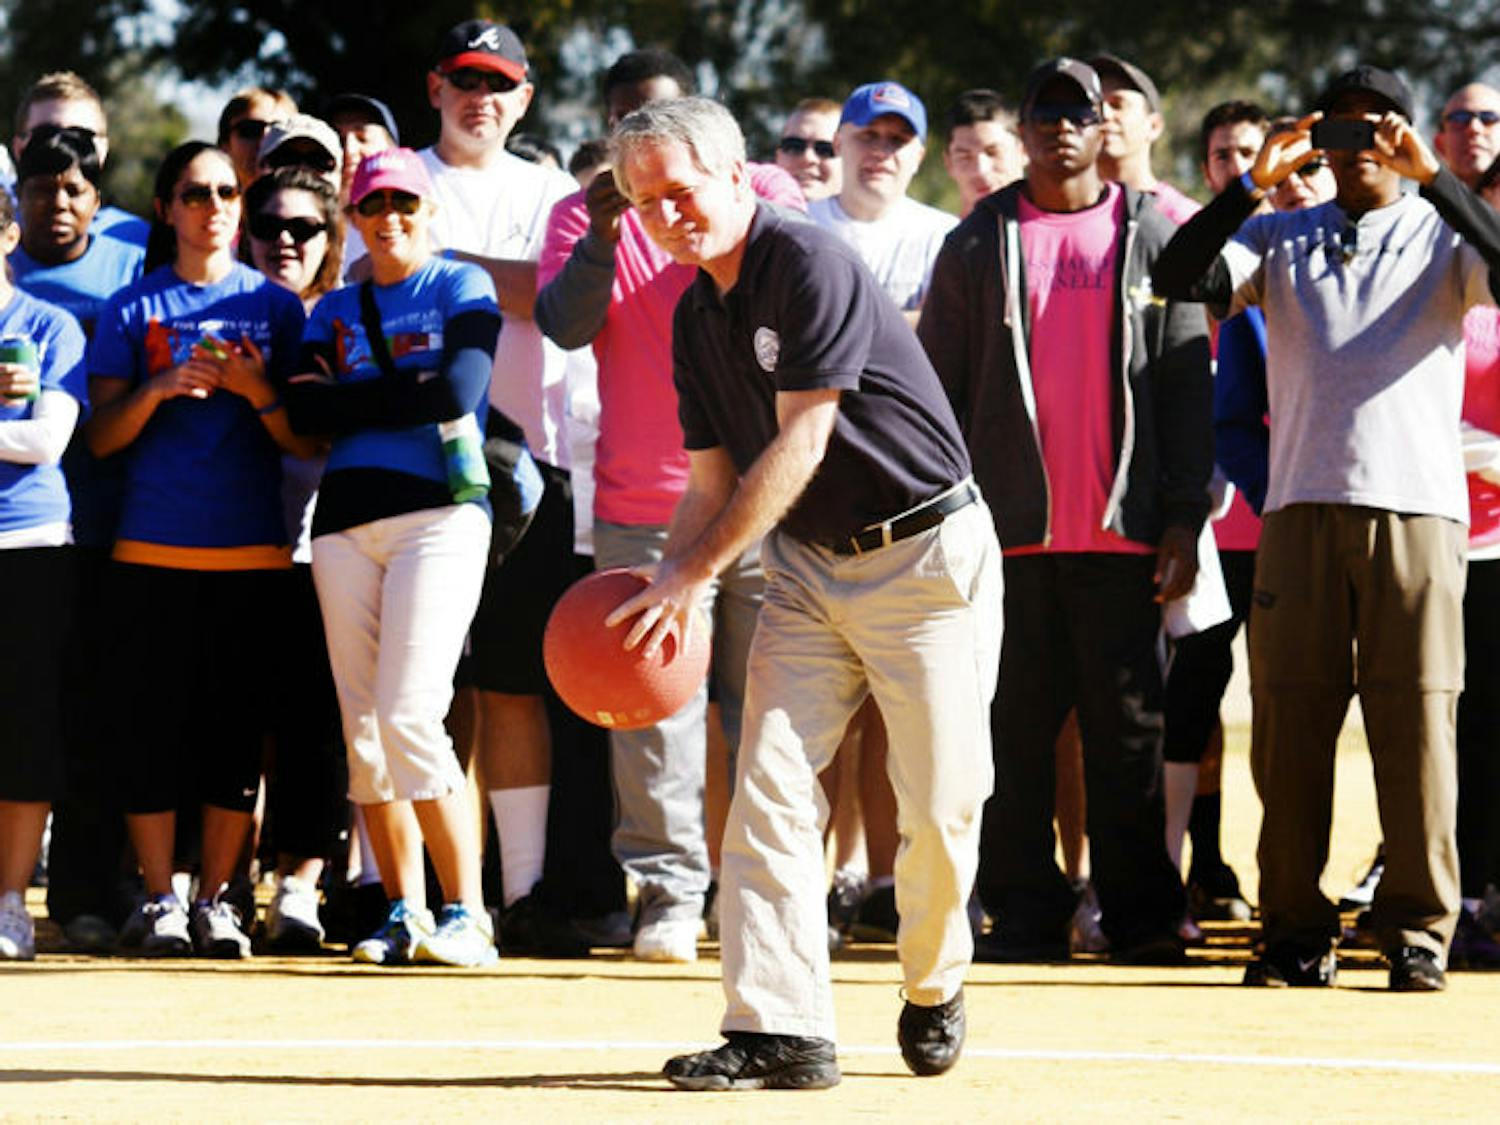 Gainesville Mayor Craig Lowe makes the opening pitch at the 2013 Alachua County Emerging Leaders Champions for Charity kickball tournament. The mayor pitched the opening kickball to Newberry Mayor Bill Conrad. The tournament collected about $11,600.